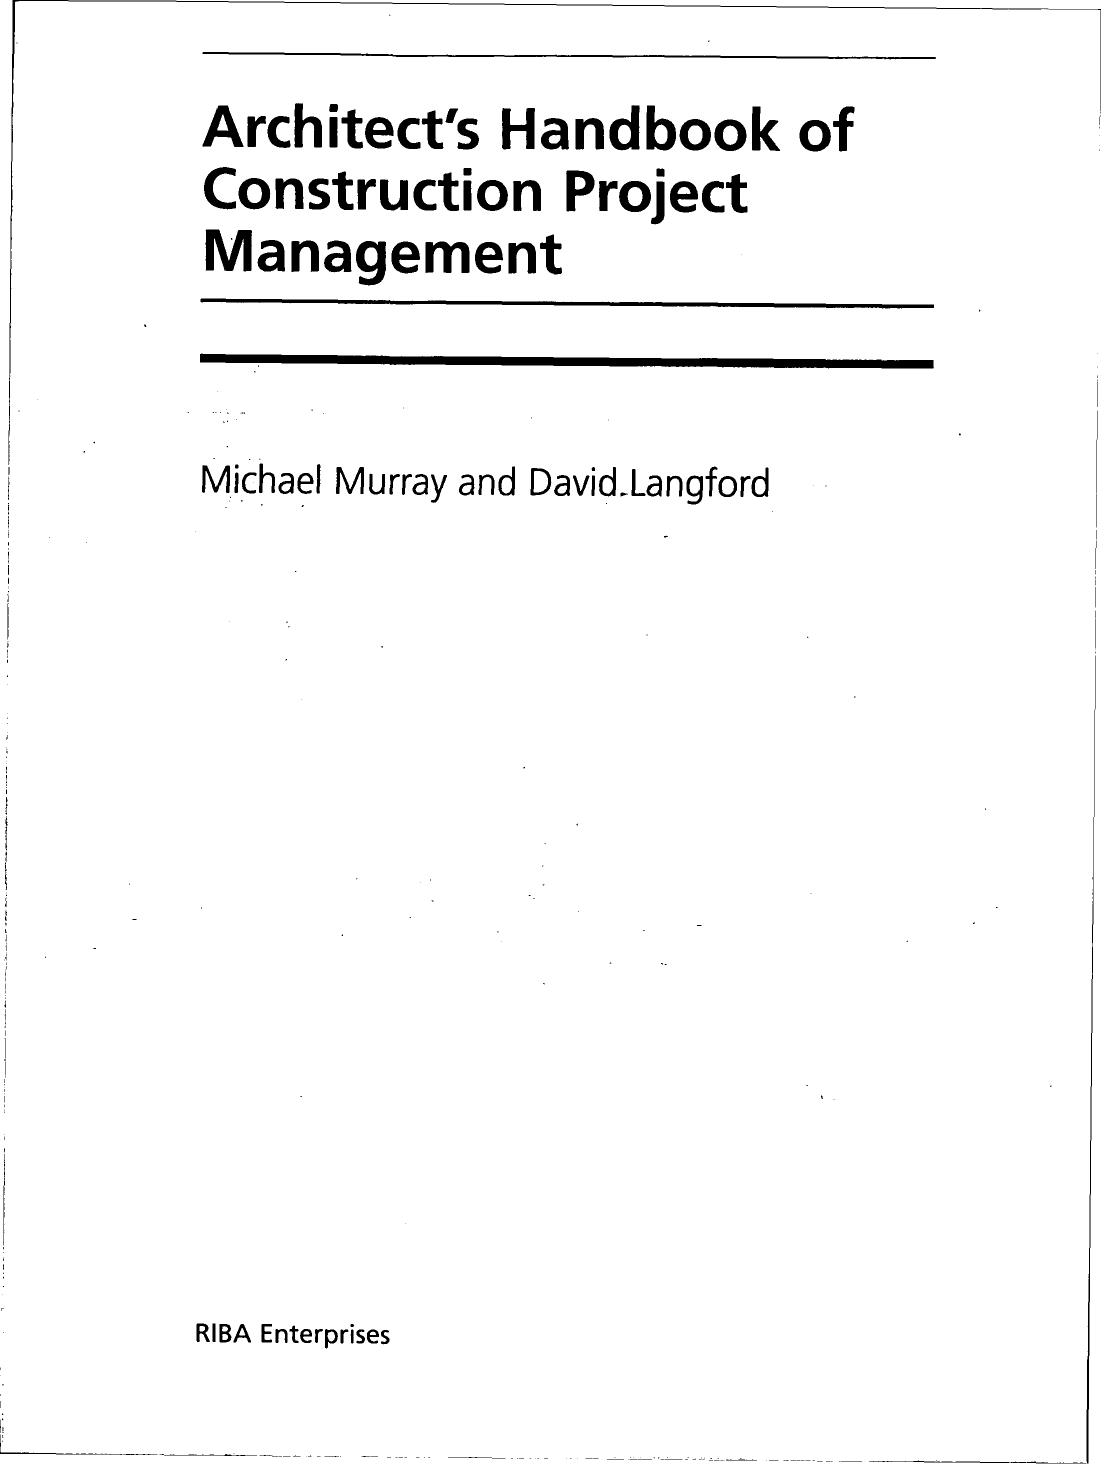 Architects handbook of construction project management 2004